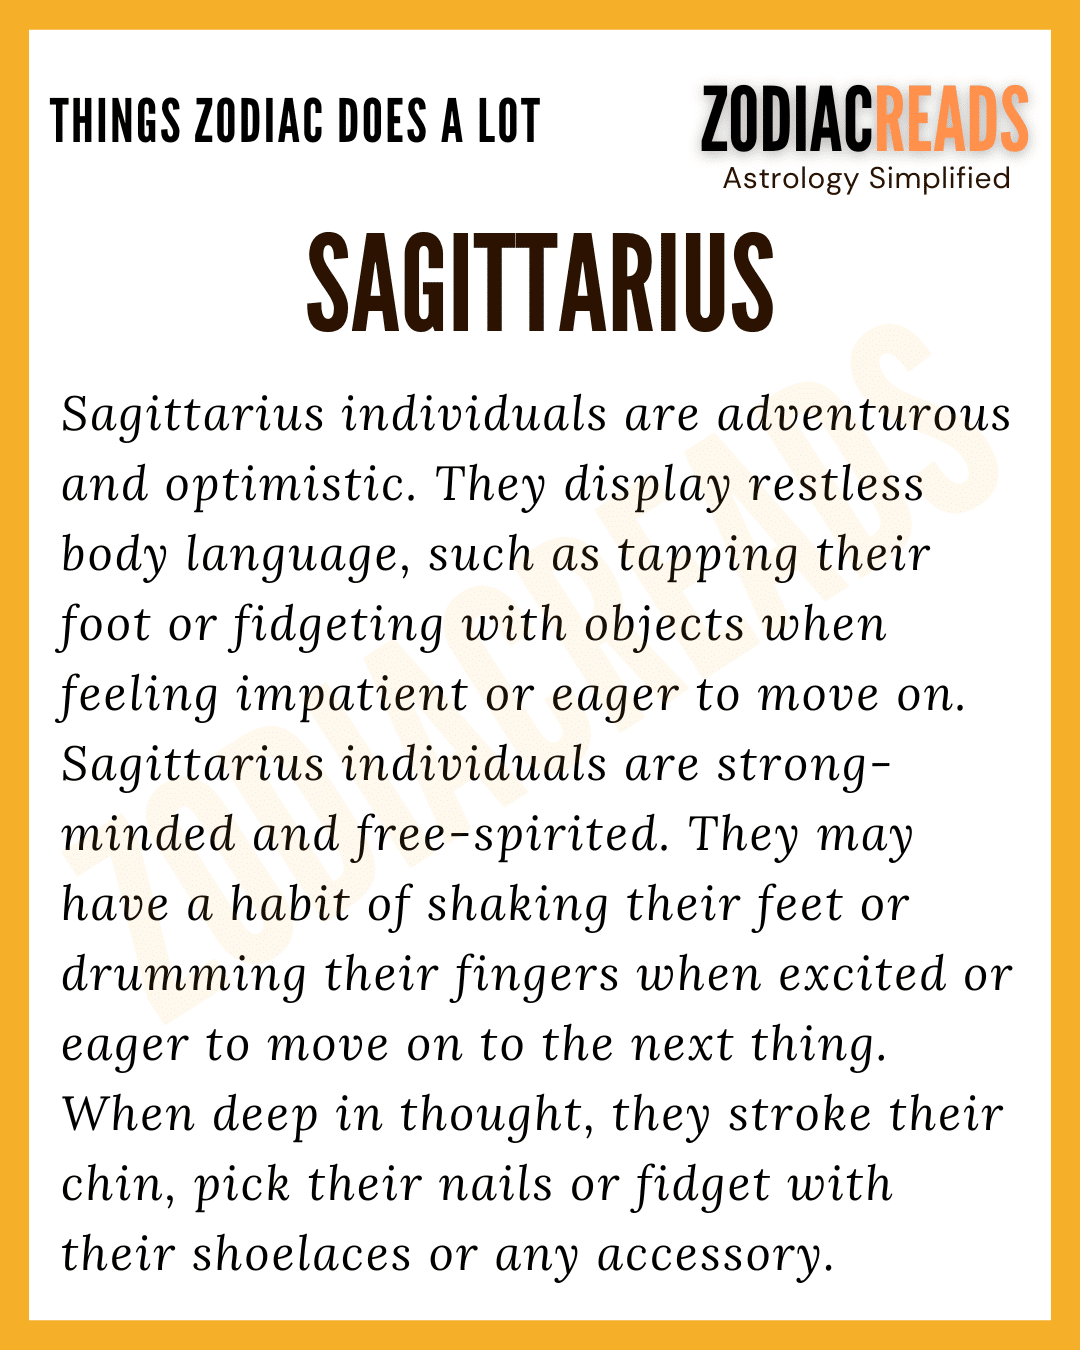 Sagittarius Things That Zodiac Signs Tend To Do A Lot